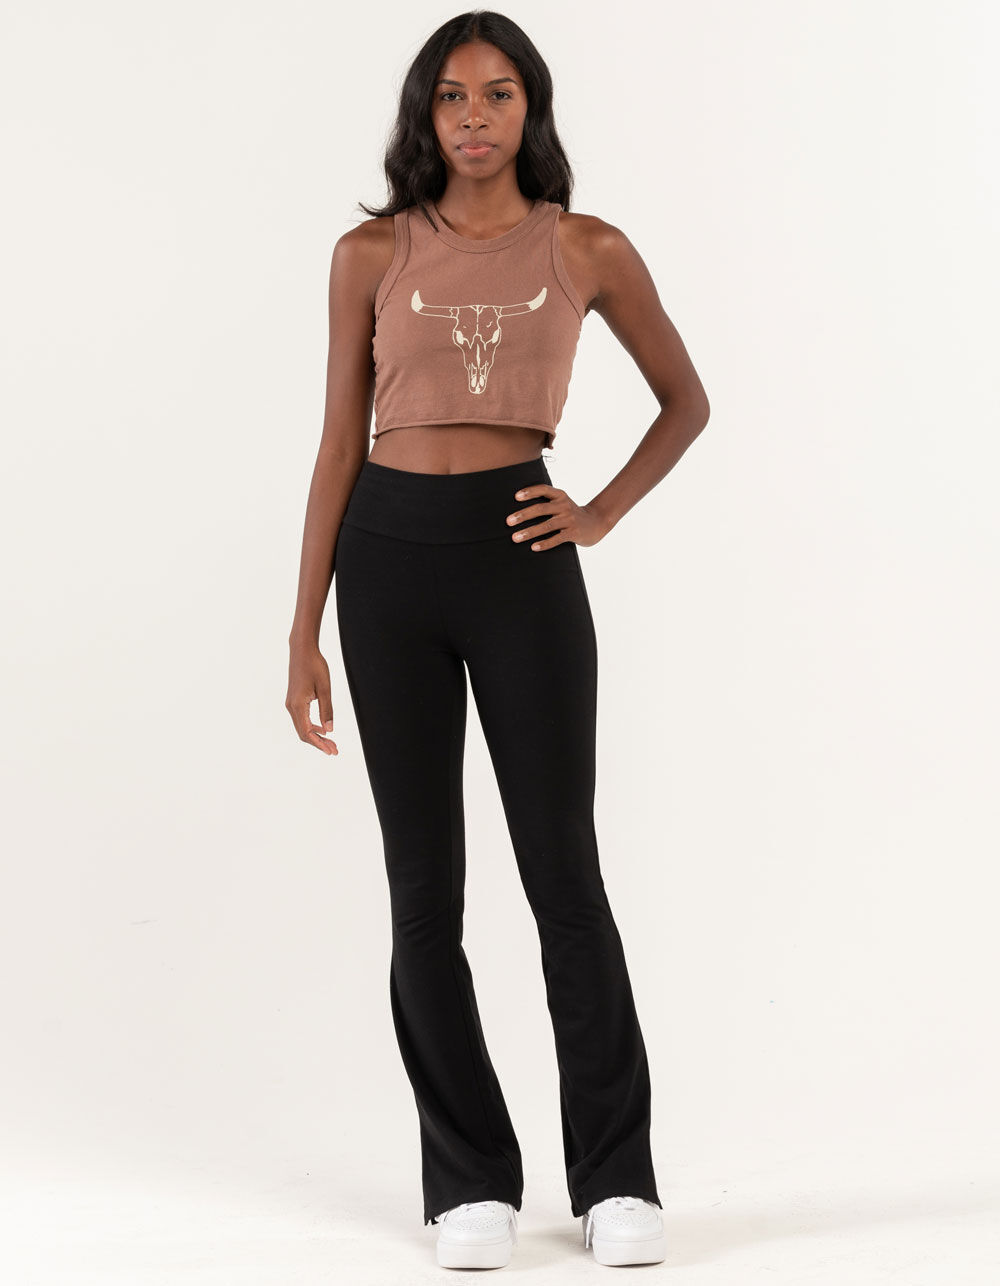 Cropped flared pants - Women